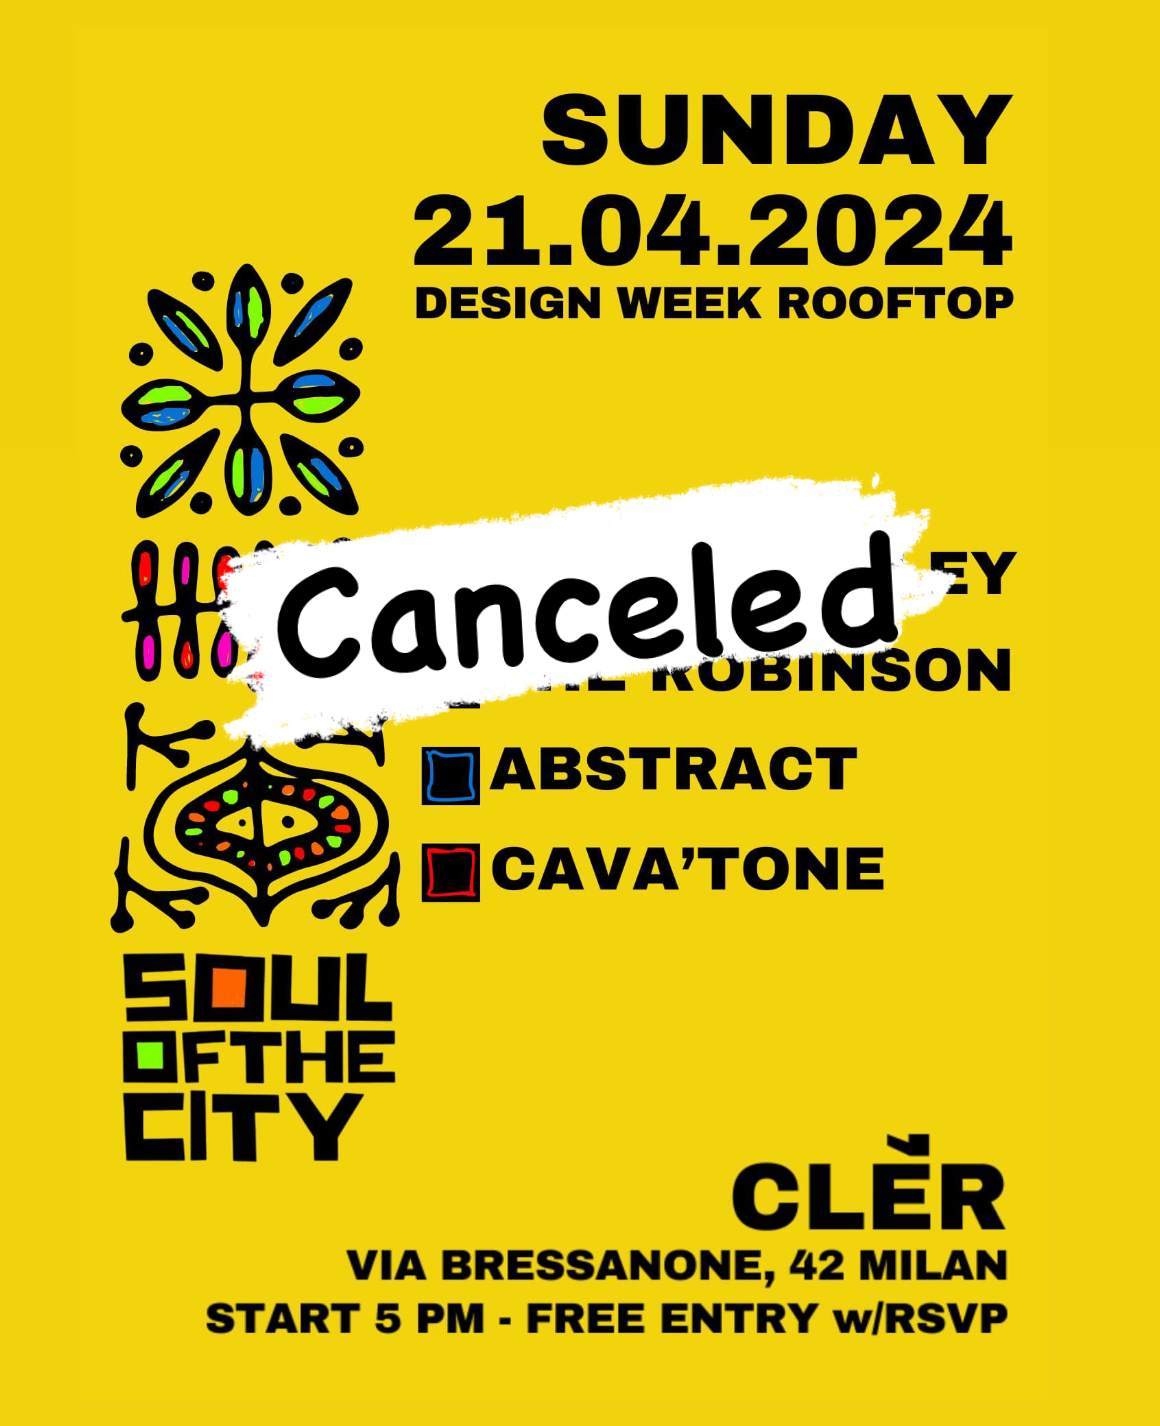 CANCELED - Soul of the city MDW24 Rooftop Party - フライヤー表